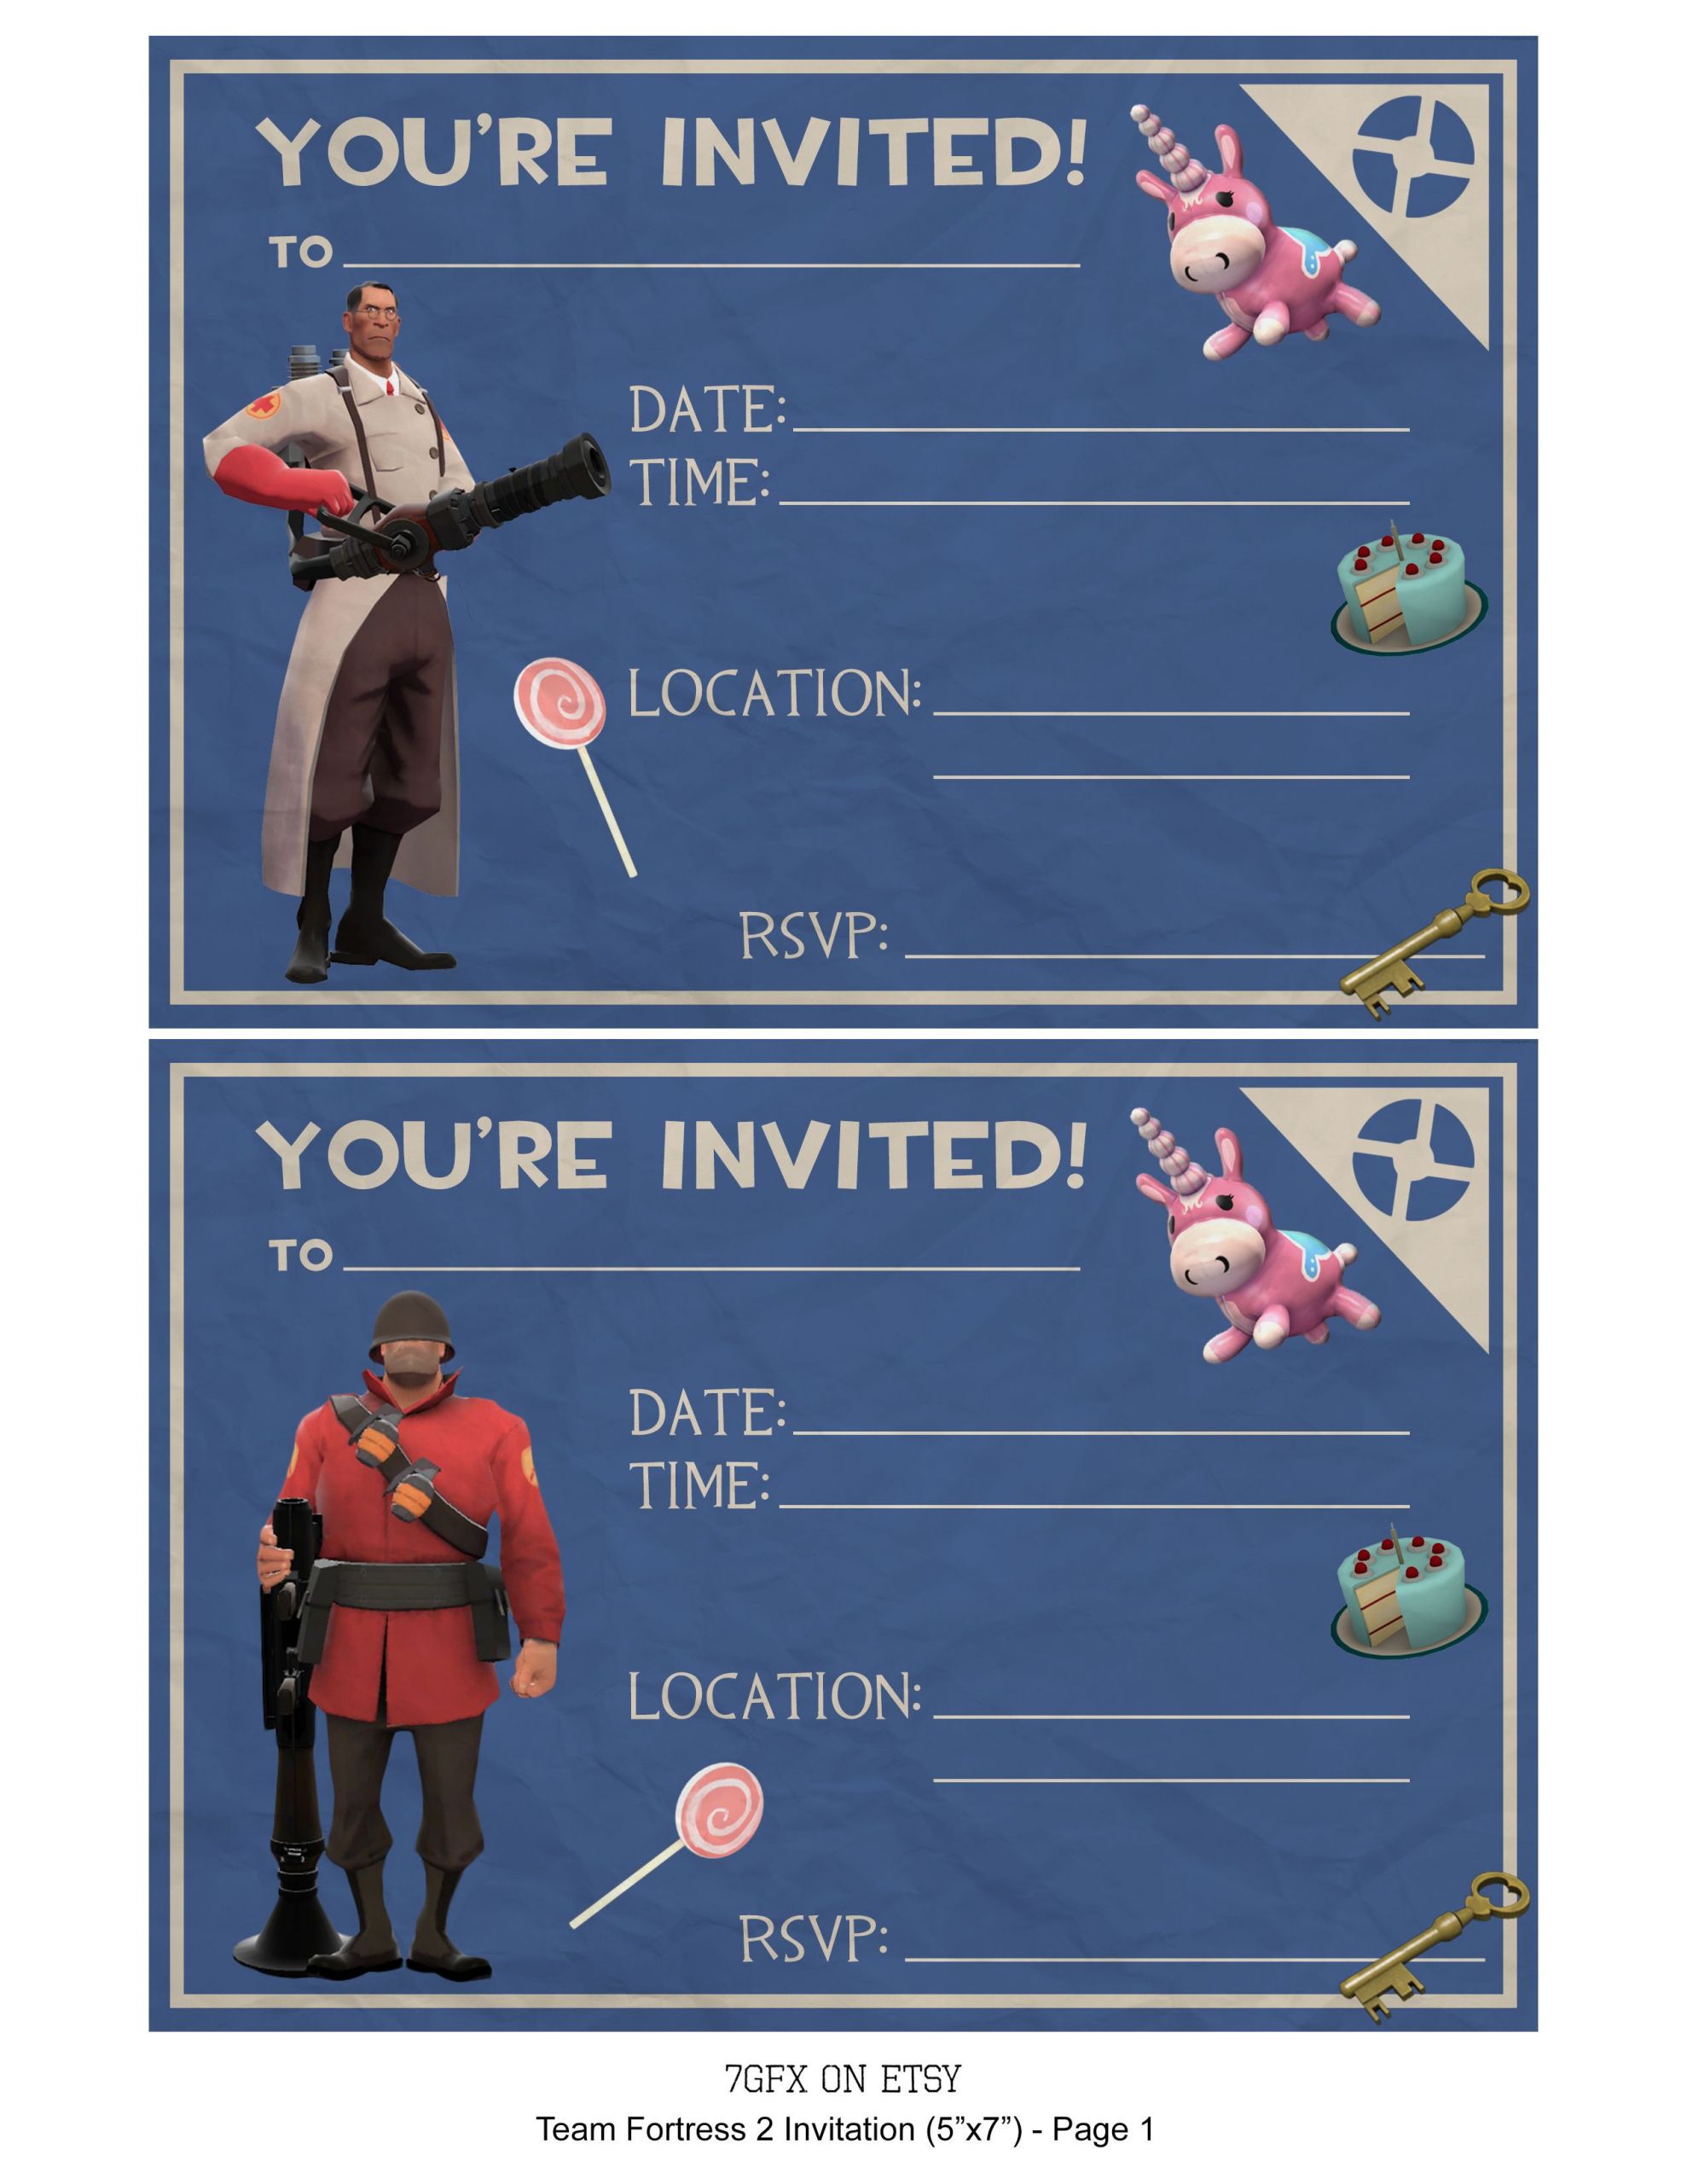 Team Fortress 2 Birthday Party Ideas
 Team Fortress 2 DIY Invitations by KTL